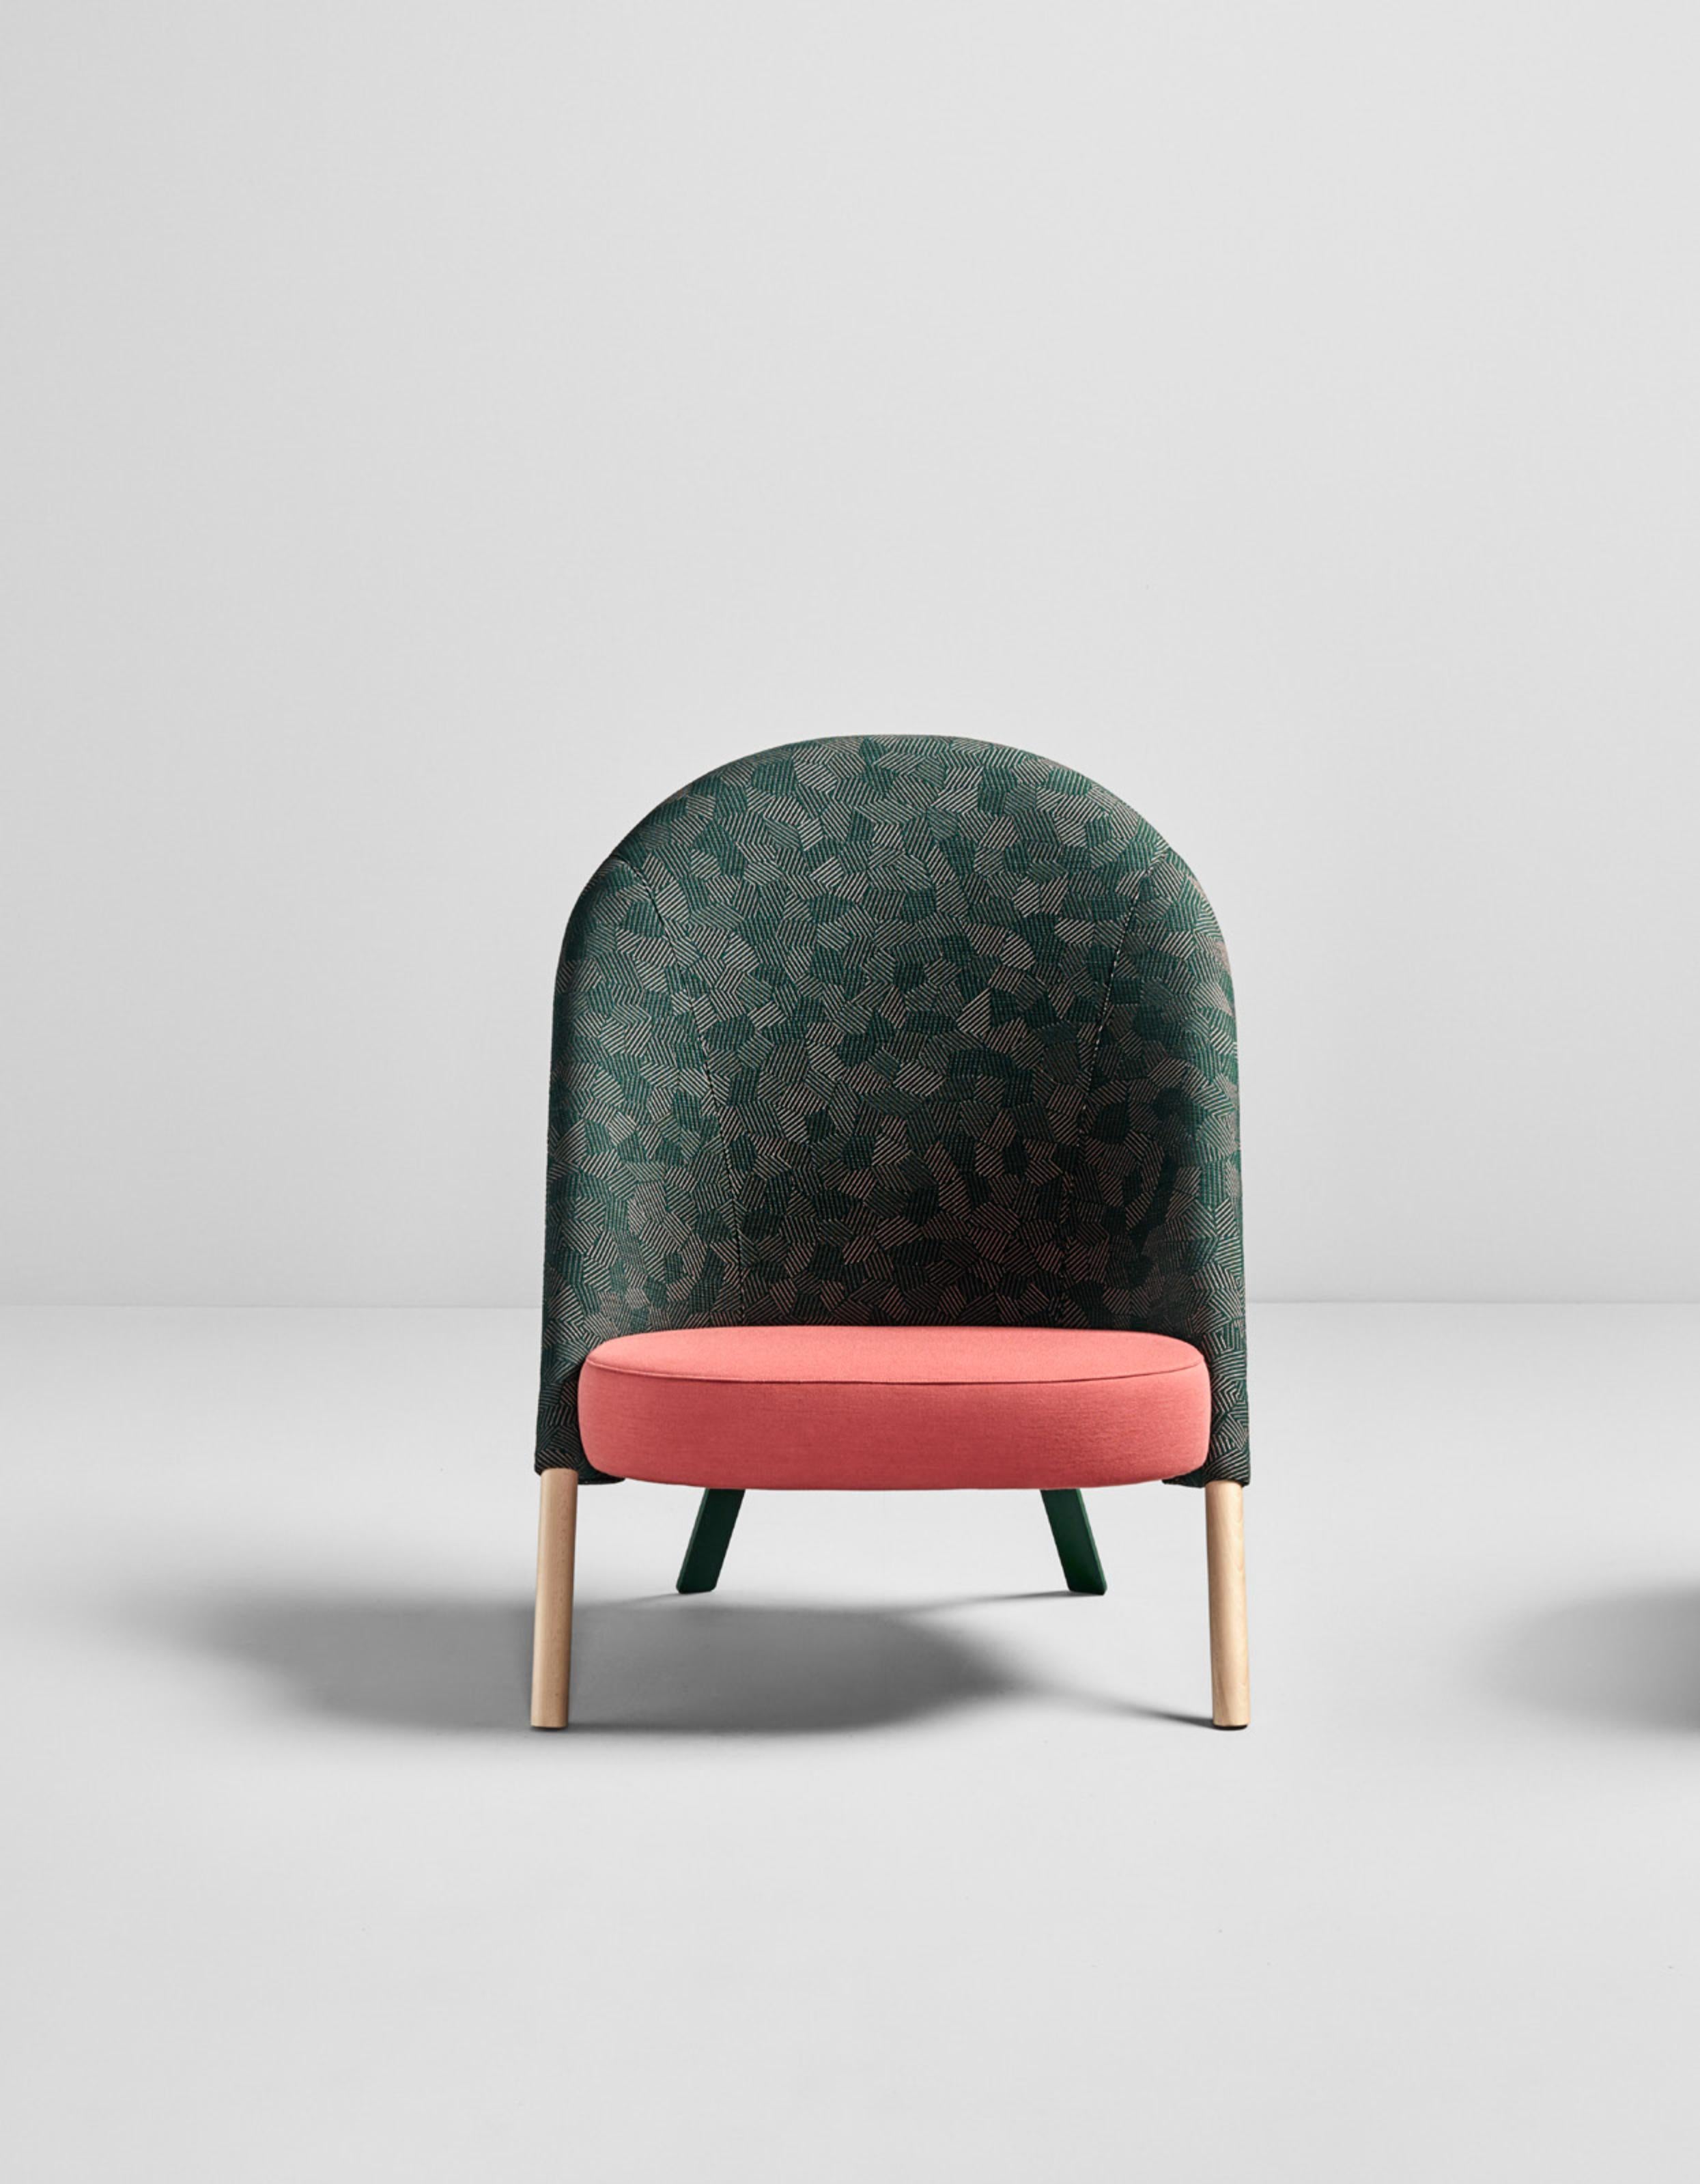 Okapi armchair by Pepe Albargues
Dimensions: Width 76 - Depth 74 - Height 102 - Seat 40 cm
Materials: Iron structure with plywood and tablex.
Foam CMHR (high resilience and flame retardant) for all our cushion filling systems.
Lacquered beech